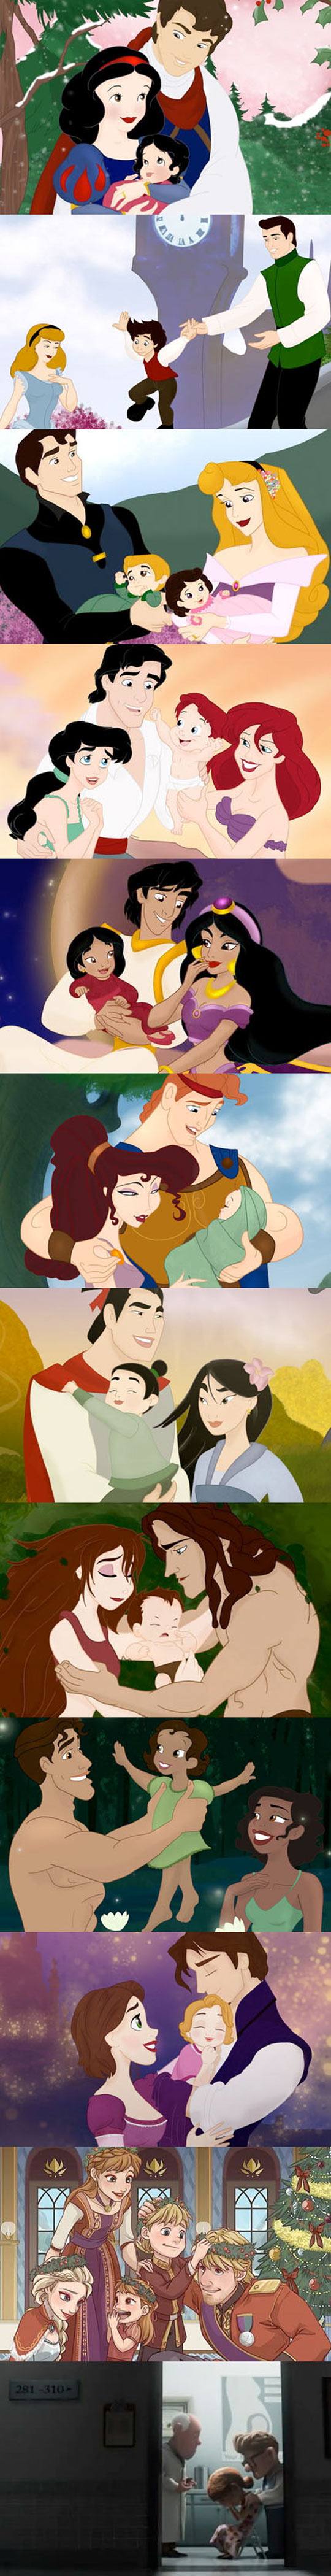 Every Disney Couple Lives Happily Ever After